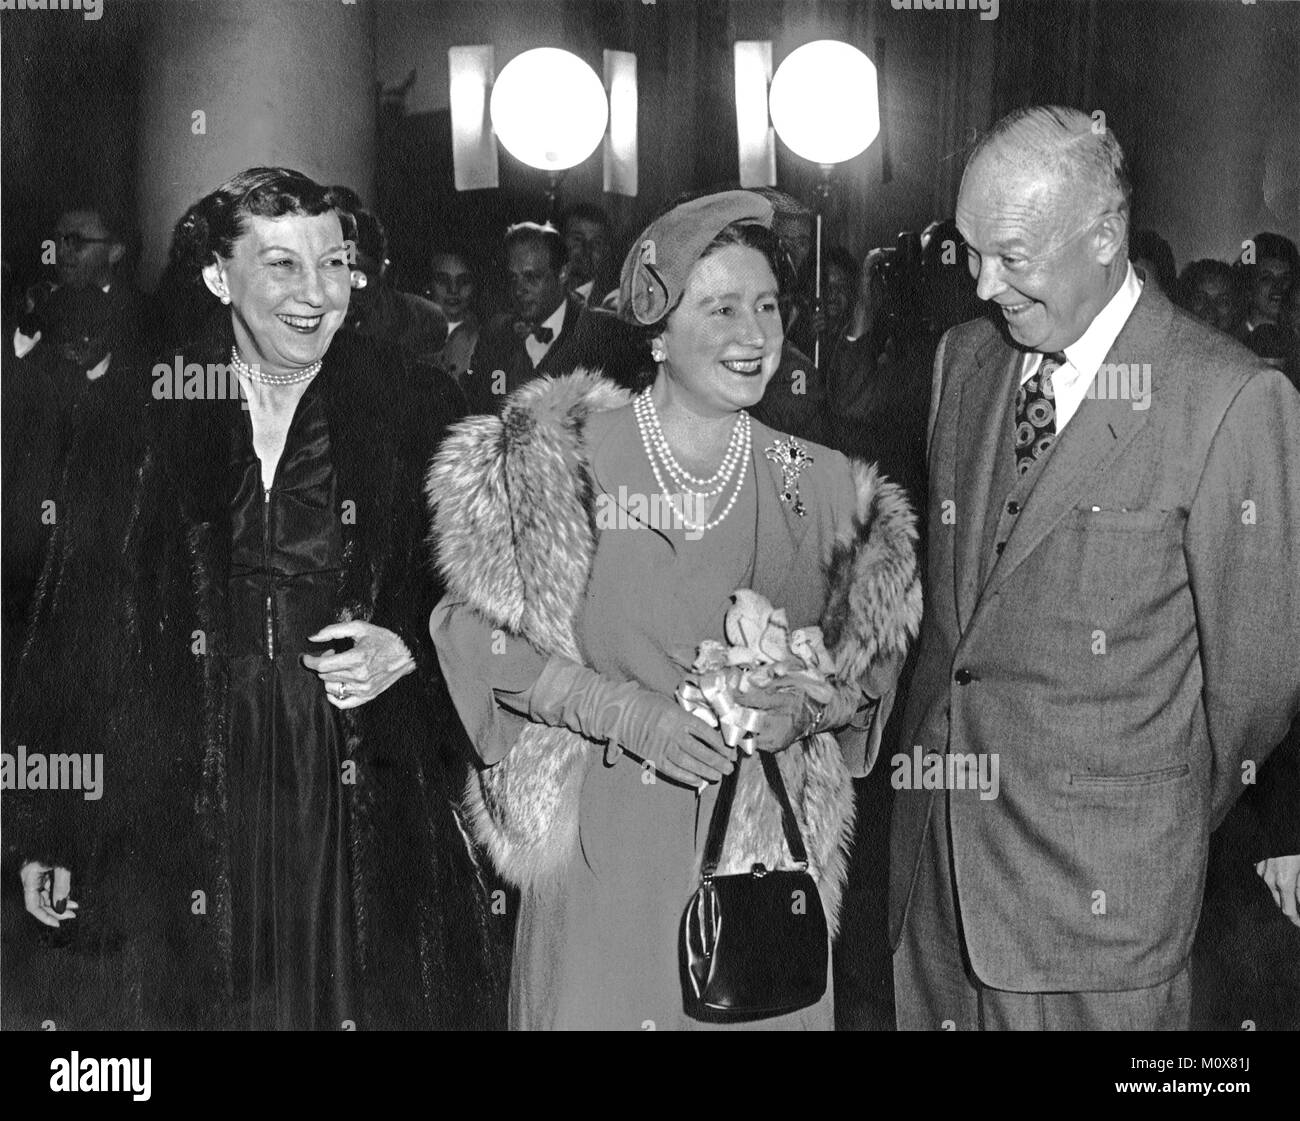 United States President Dwight D. Eisenhower, right, and first lady Mamie Eisenhower, left, welcome H.M. Queen Elizabeth, The Queen Mother of Great Britain, center, to the White House in Washington, DC for a dinner in her honor on November 4, 1954. Mandatory Credit: Abbie Rowe / National Park Service via CNP/ MediaPunch Stock Photo